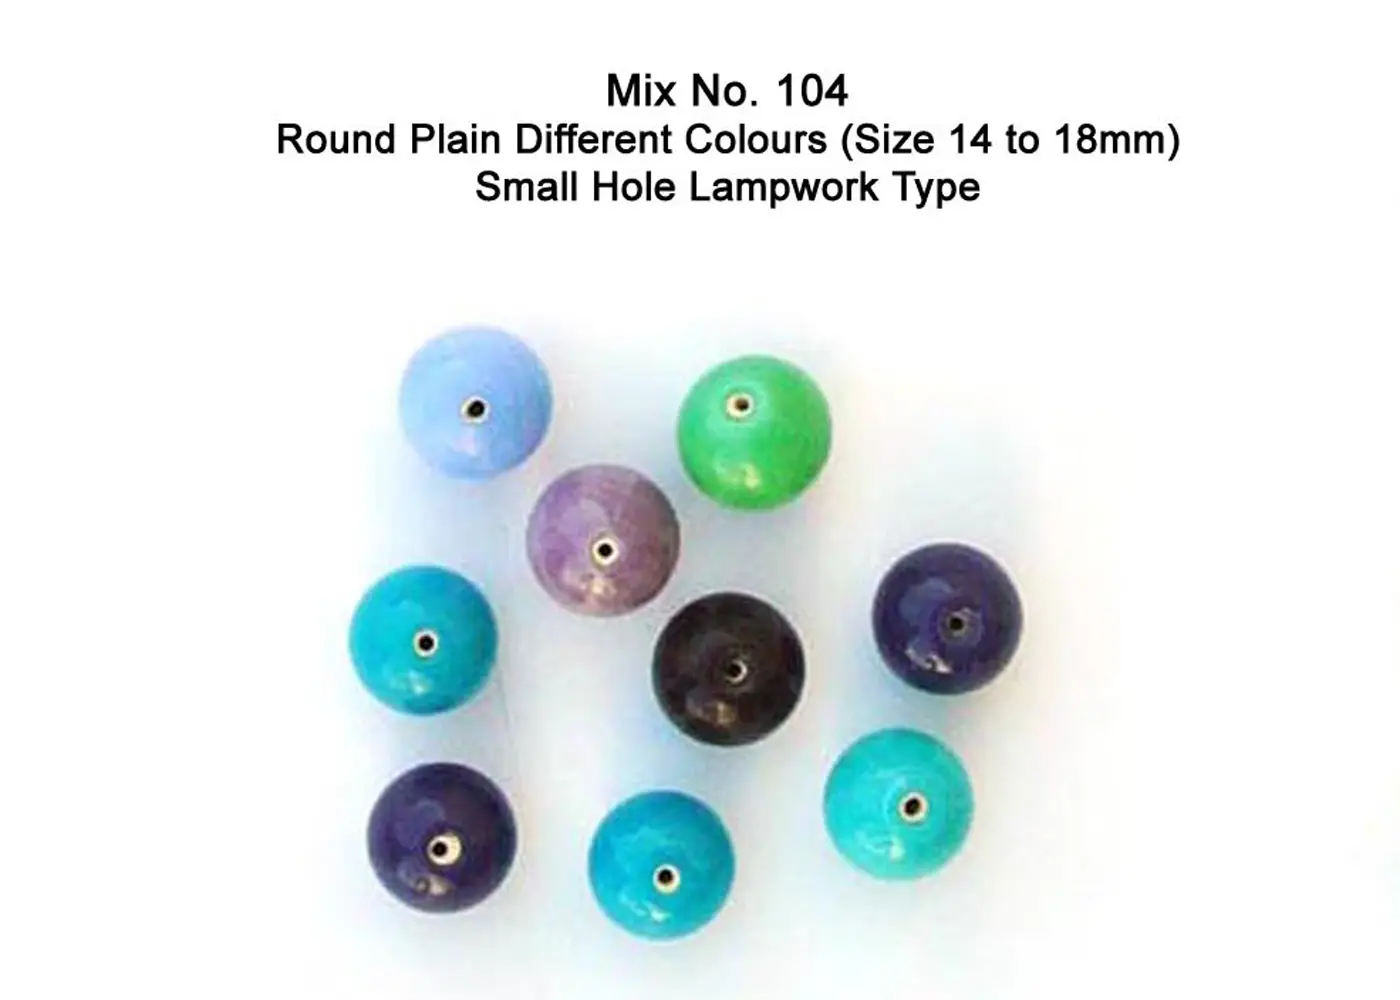 Round Plain different colors size between 14 mm to 18 mm small hole lampwork type